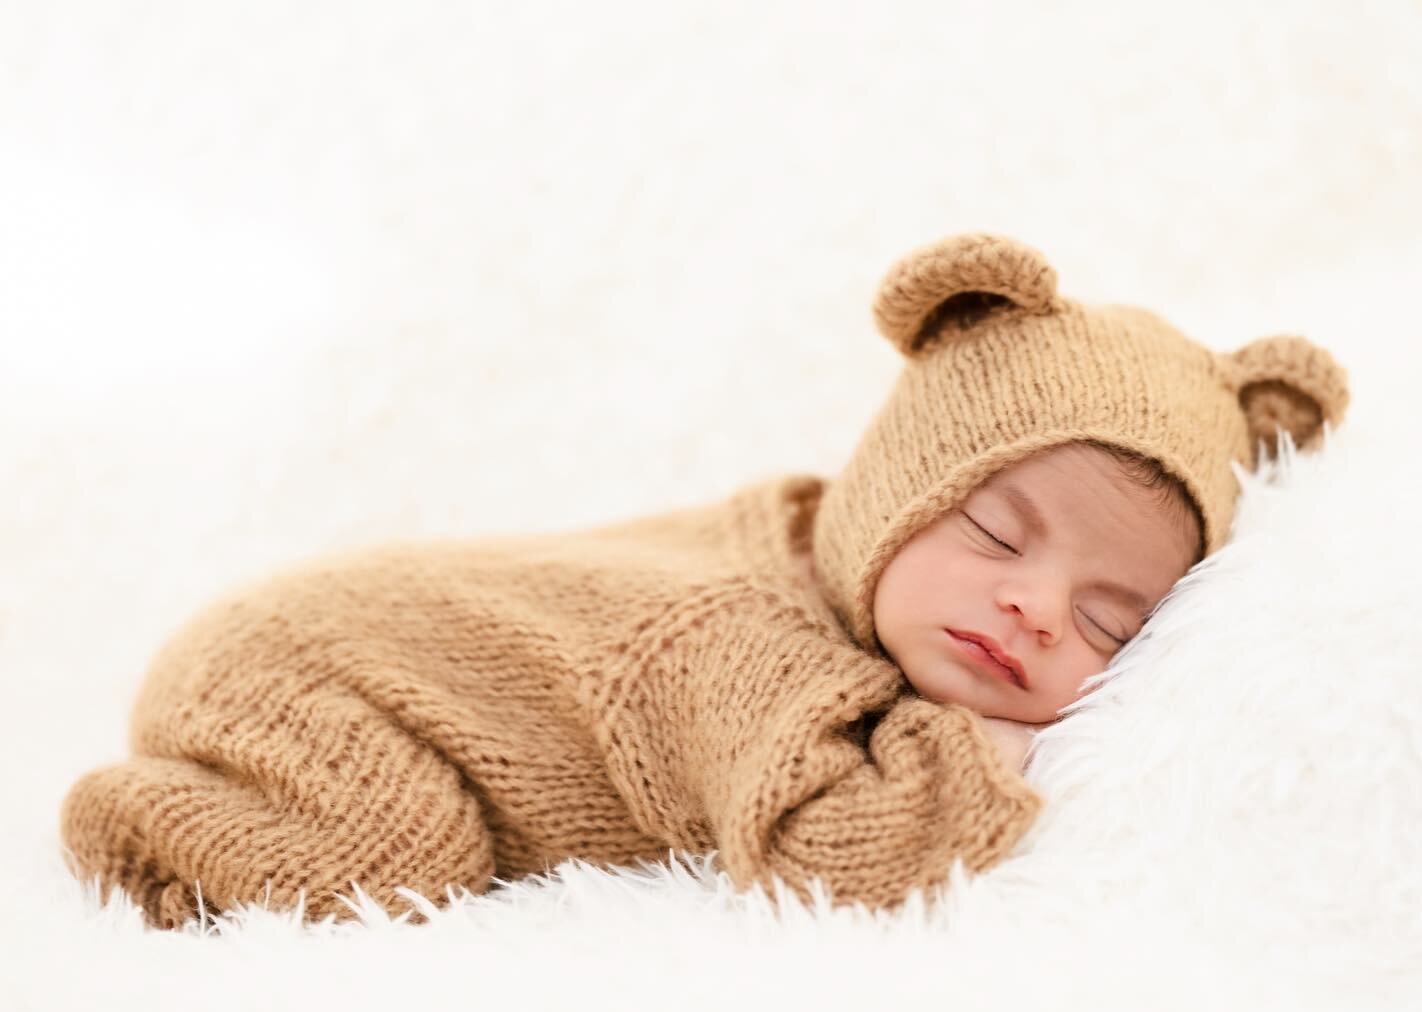 I was so excited to use this new teddy bear outfit and it fit little Philippe perfectly. I think he felt very cozy for his in-home newborn session. Some families prefer an in studio session but some prefer in home and I&rsquo;m happy to offer both wi